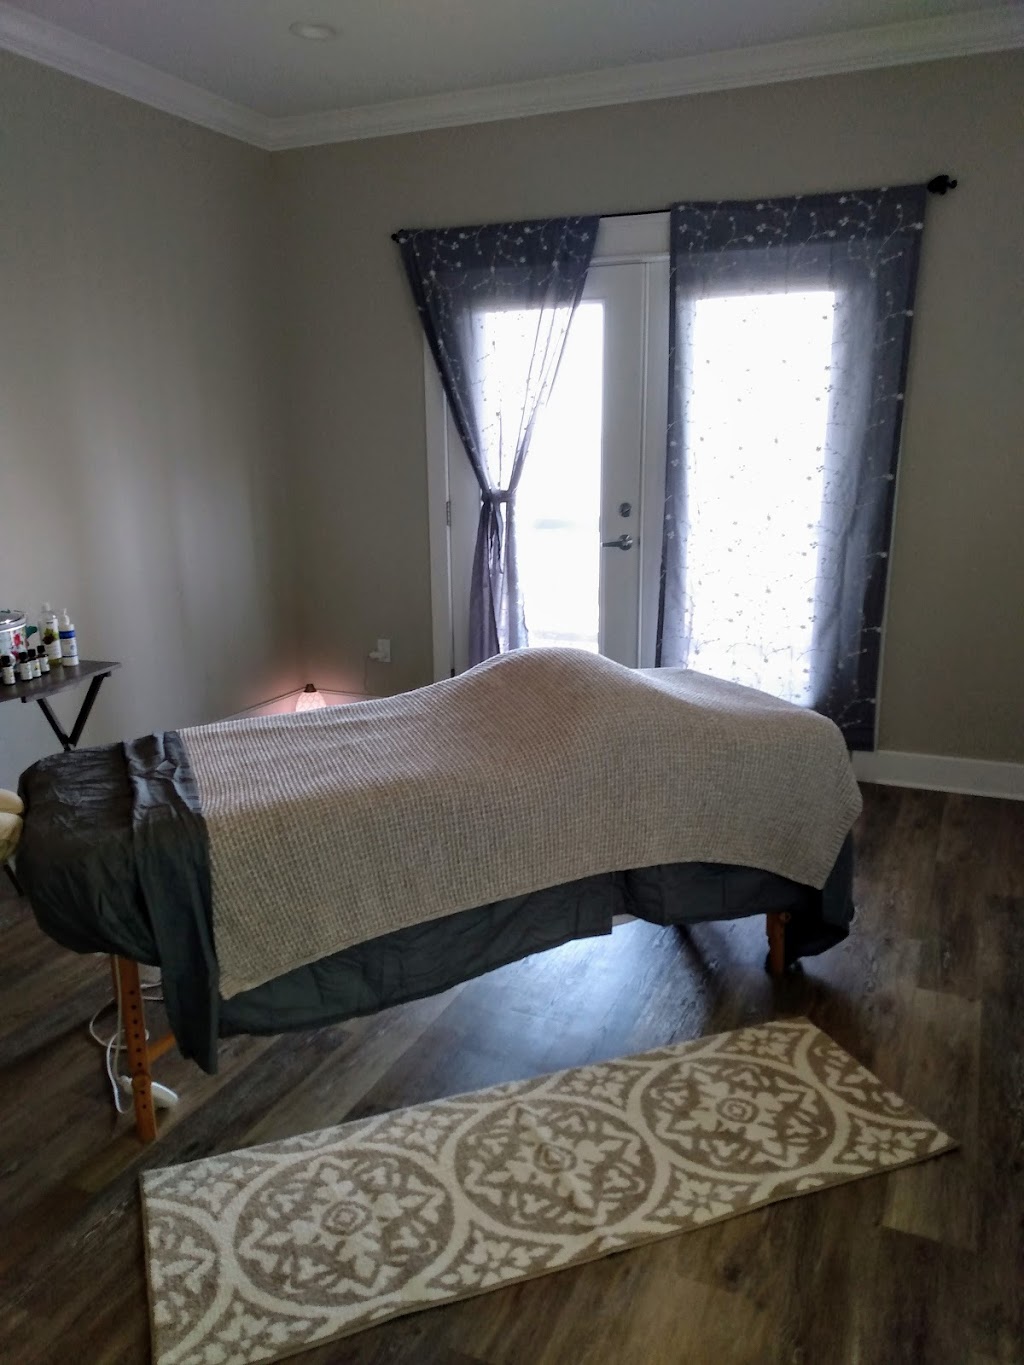 Massage by Christina Alessandra, LMT | 1101 TX-35 BUS Suite #1, Rockport, TX 78382, USA | Phone: (361) 229-3521